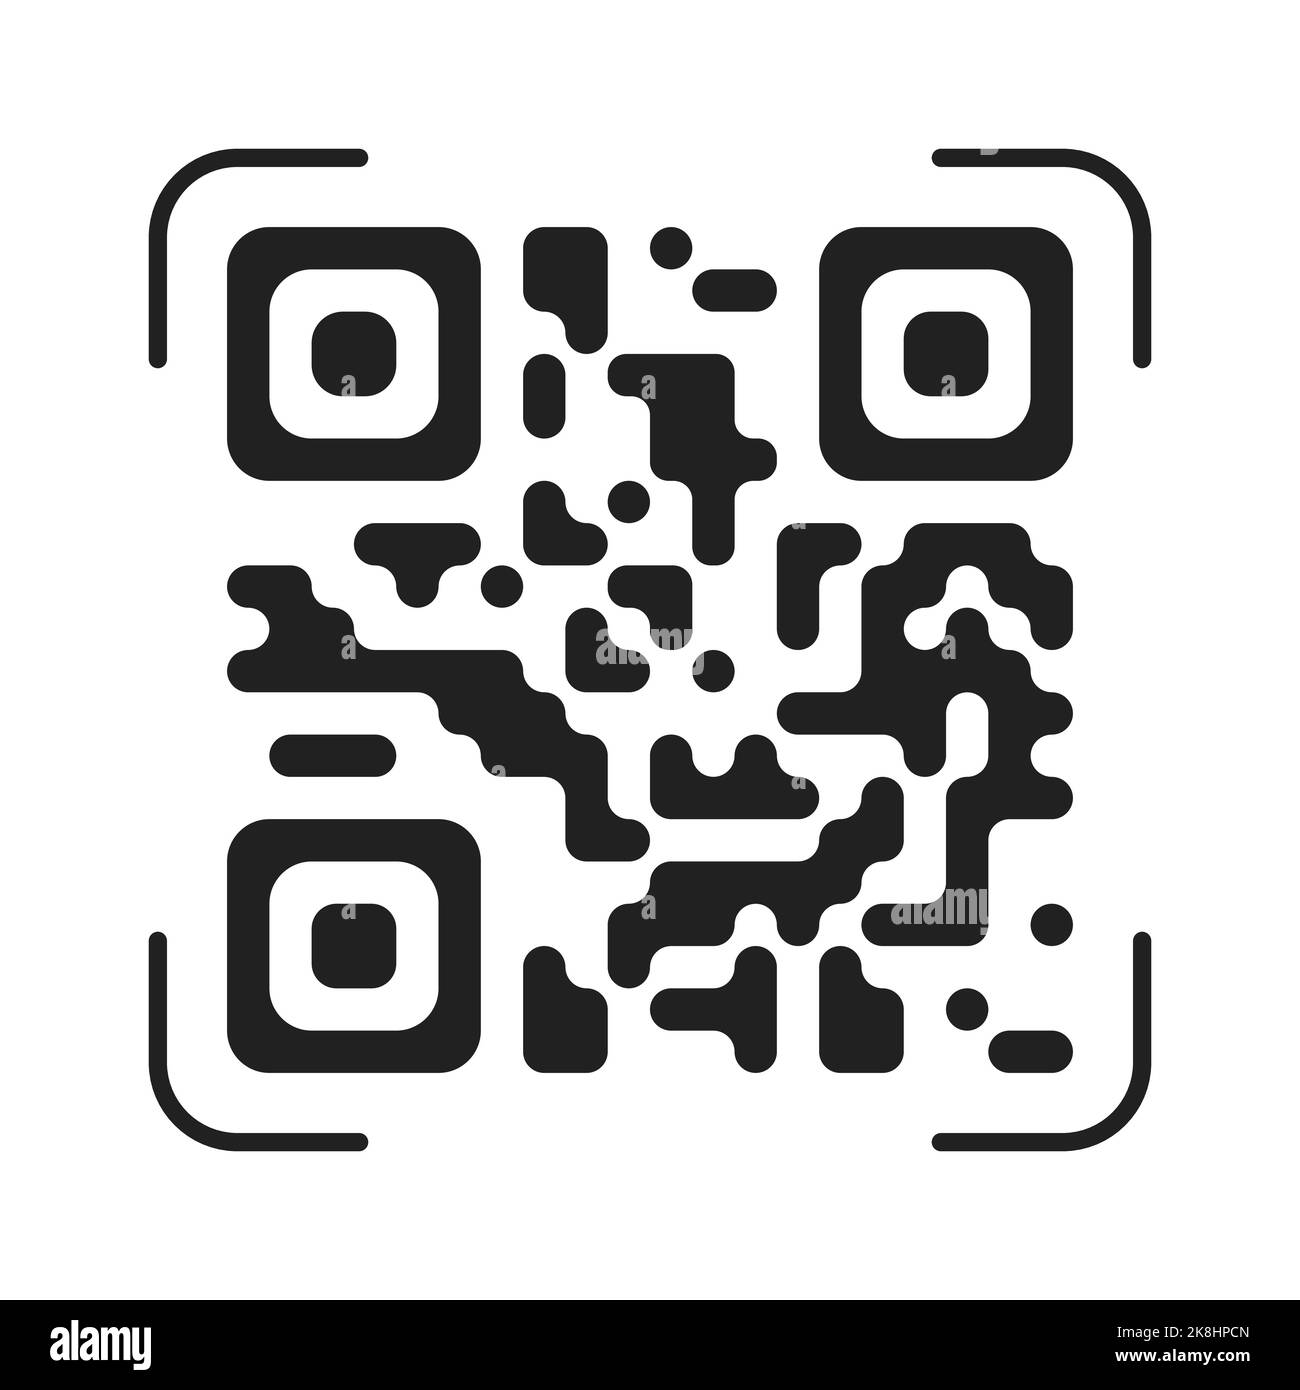 Qr code sample vector abstract icon isolated on white background. Vector illustration.  Stock Vector